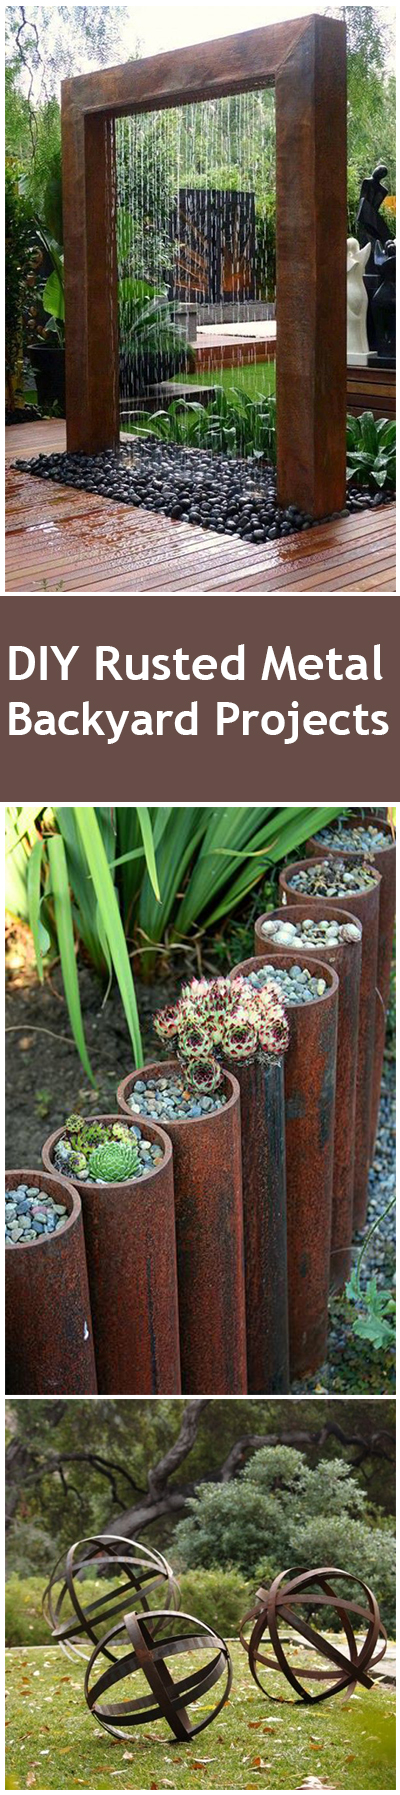 Rusted metal DIY projects, DIY projects, outdoor DIY, popular pin, backyard projects, DIY backyard projects, rusted metal, backyard upcycling projects.